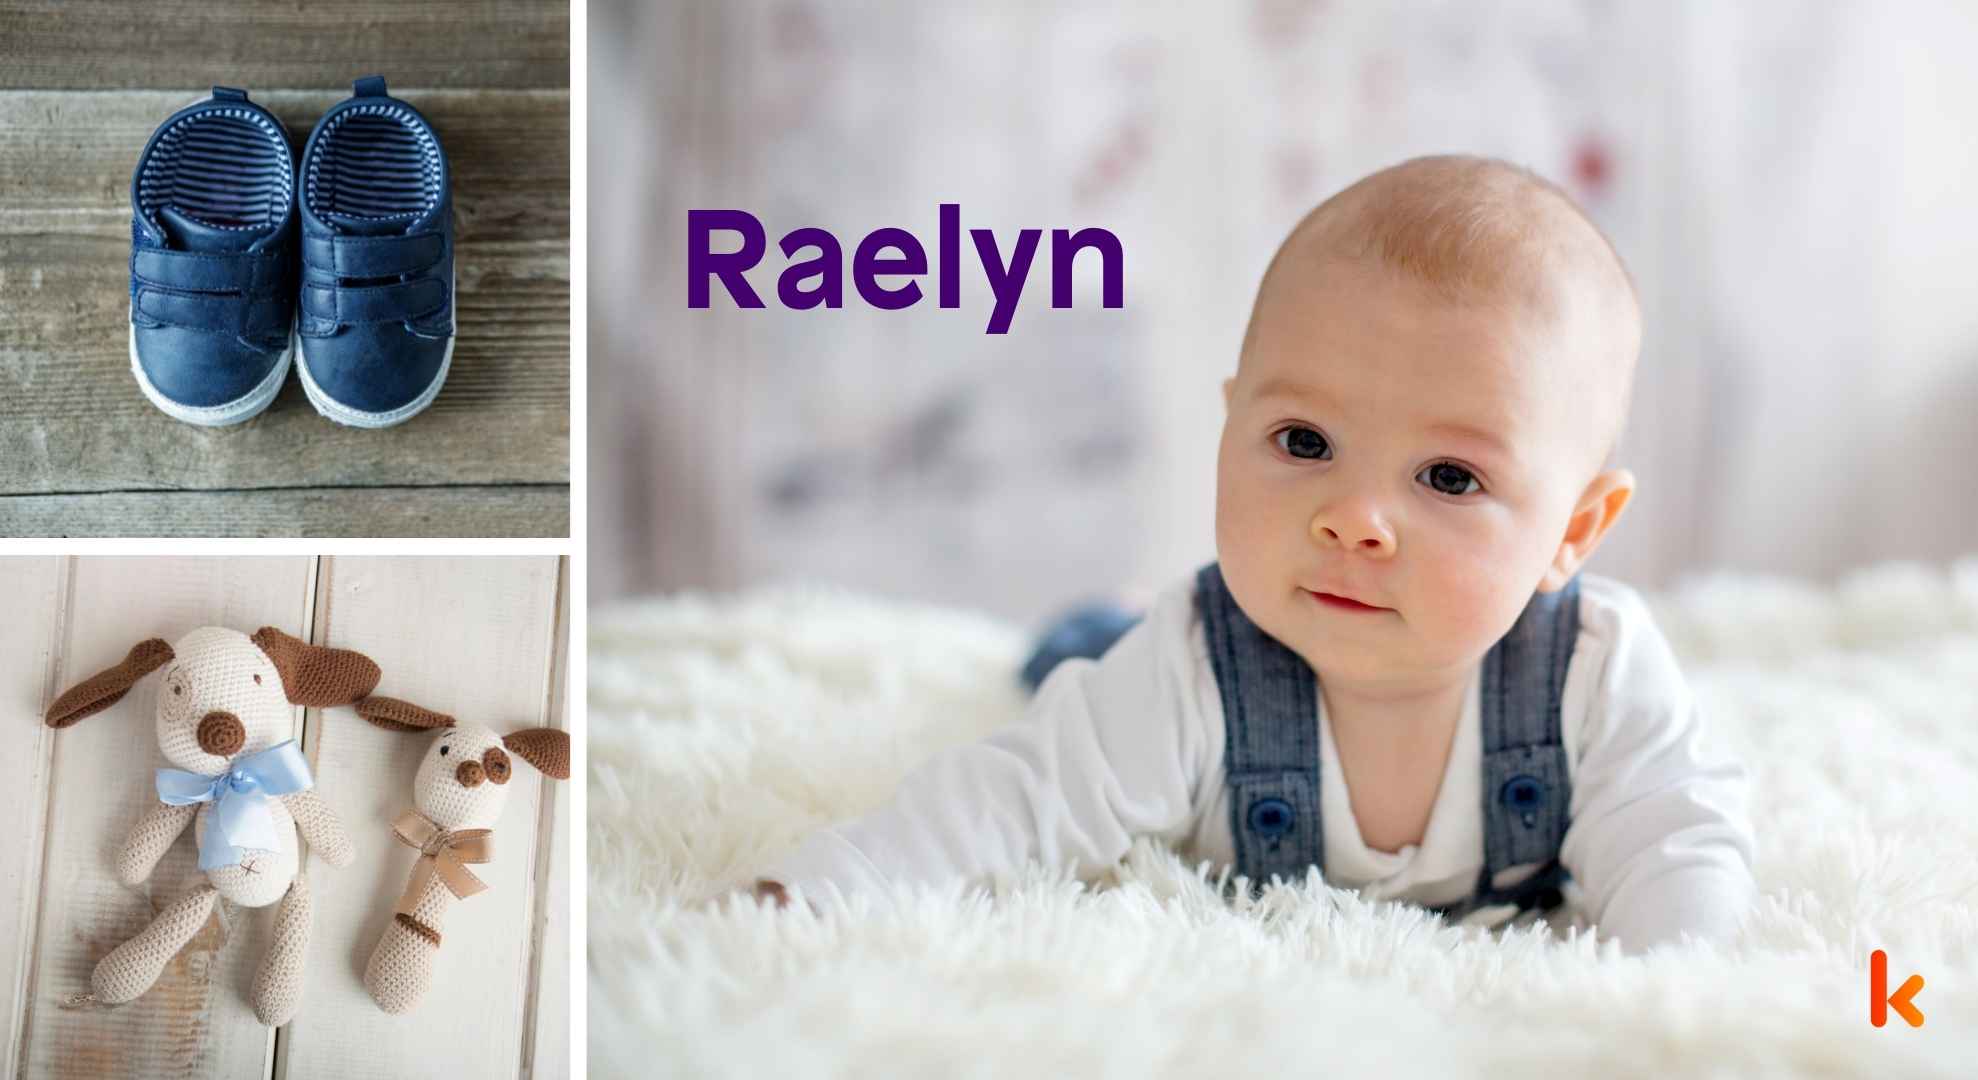 Meaning of the name Raelyn